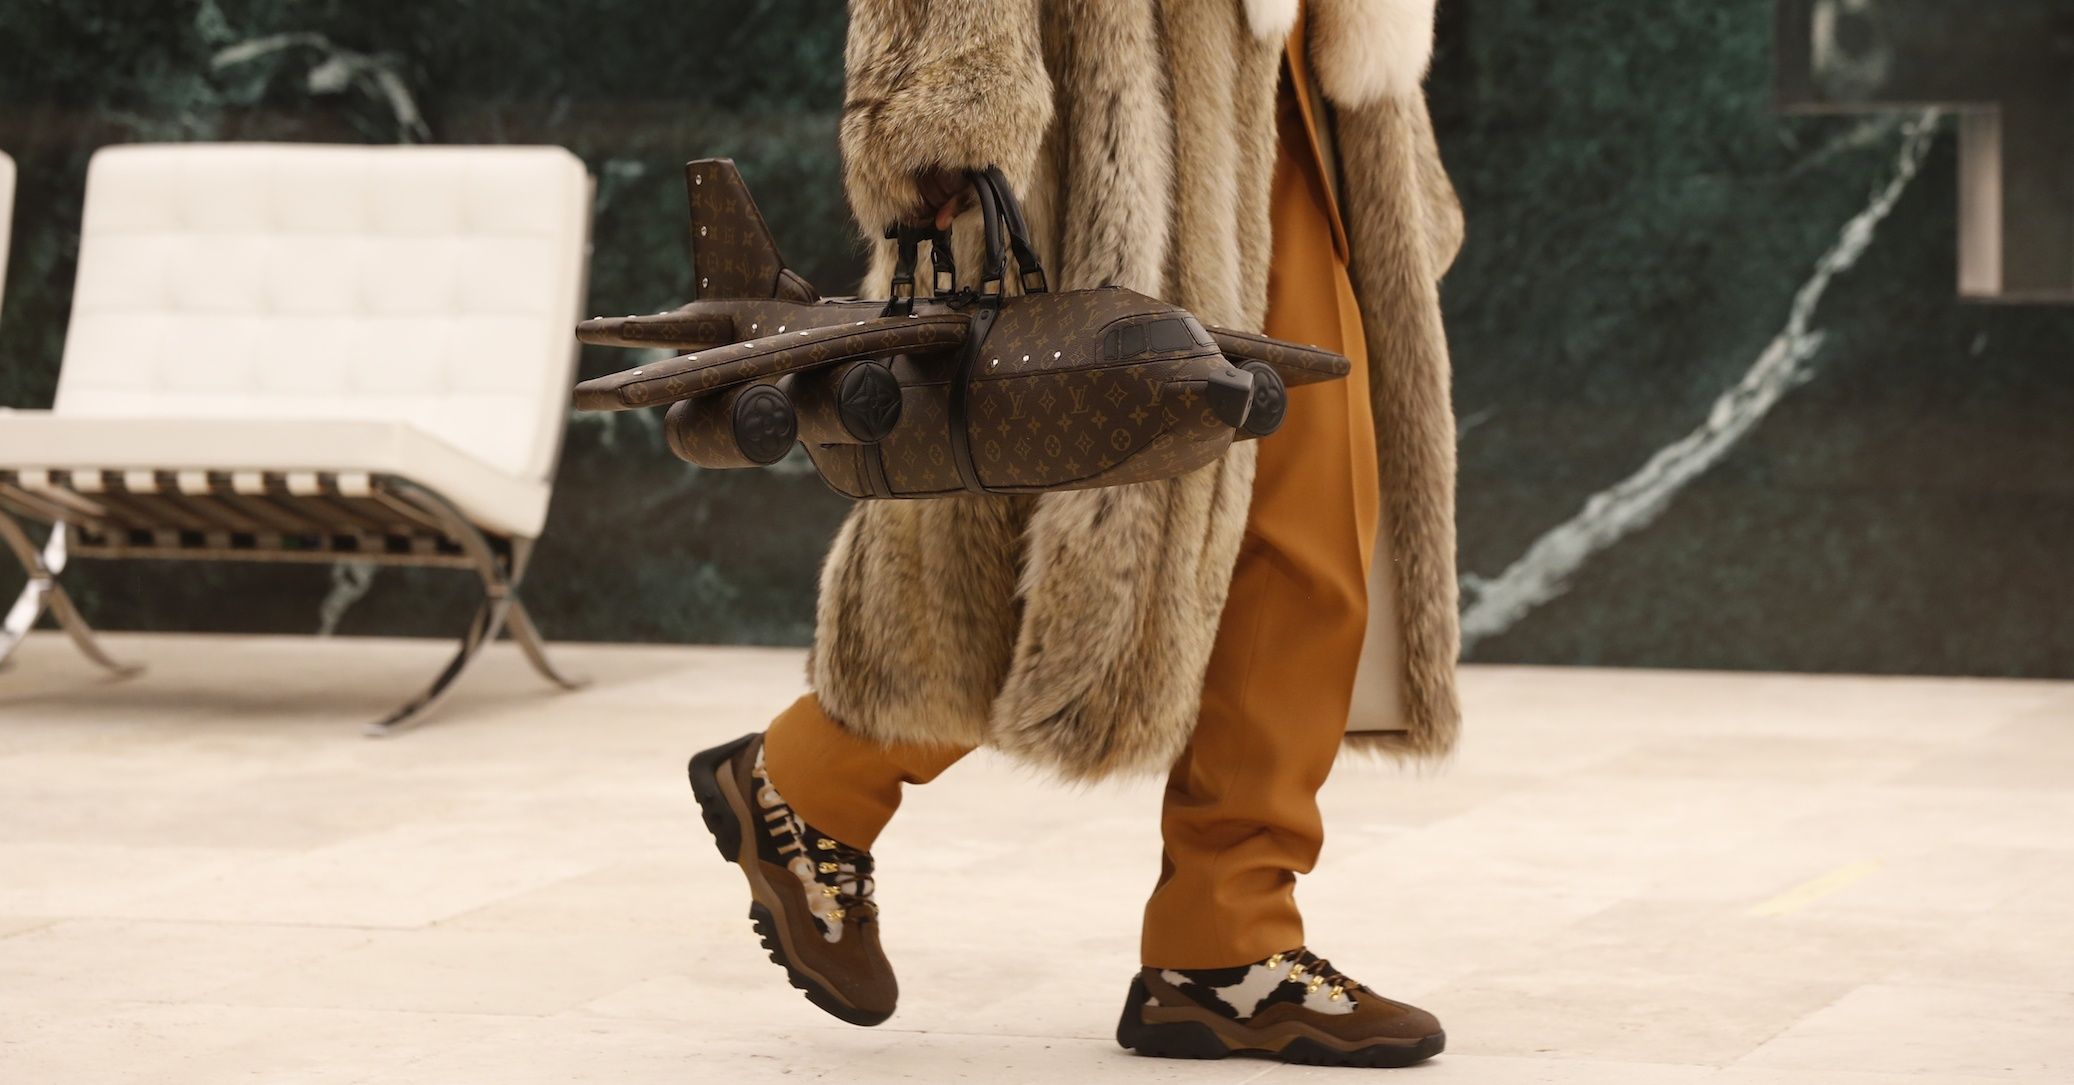 Louis Vuitton FW21: 10 must-haves from Virgil Abloh's new collection